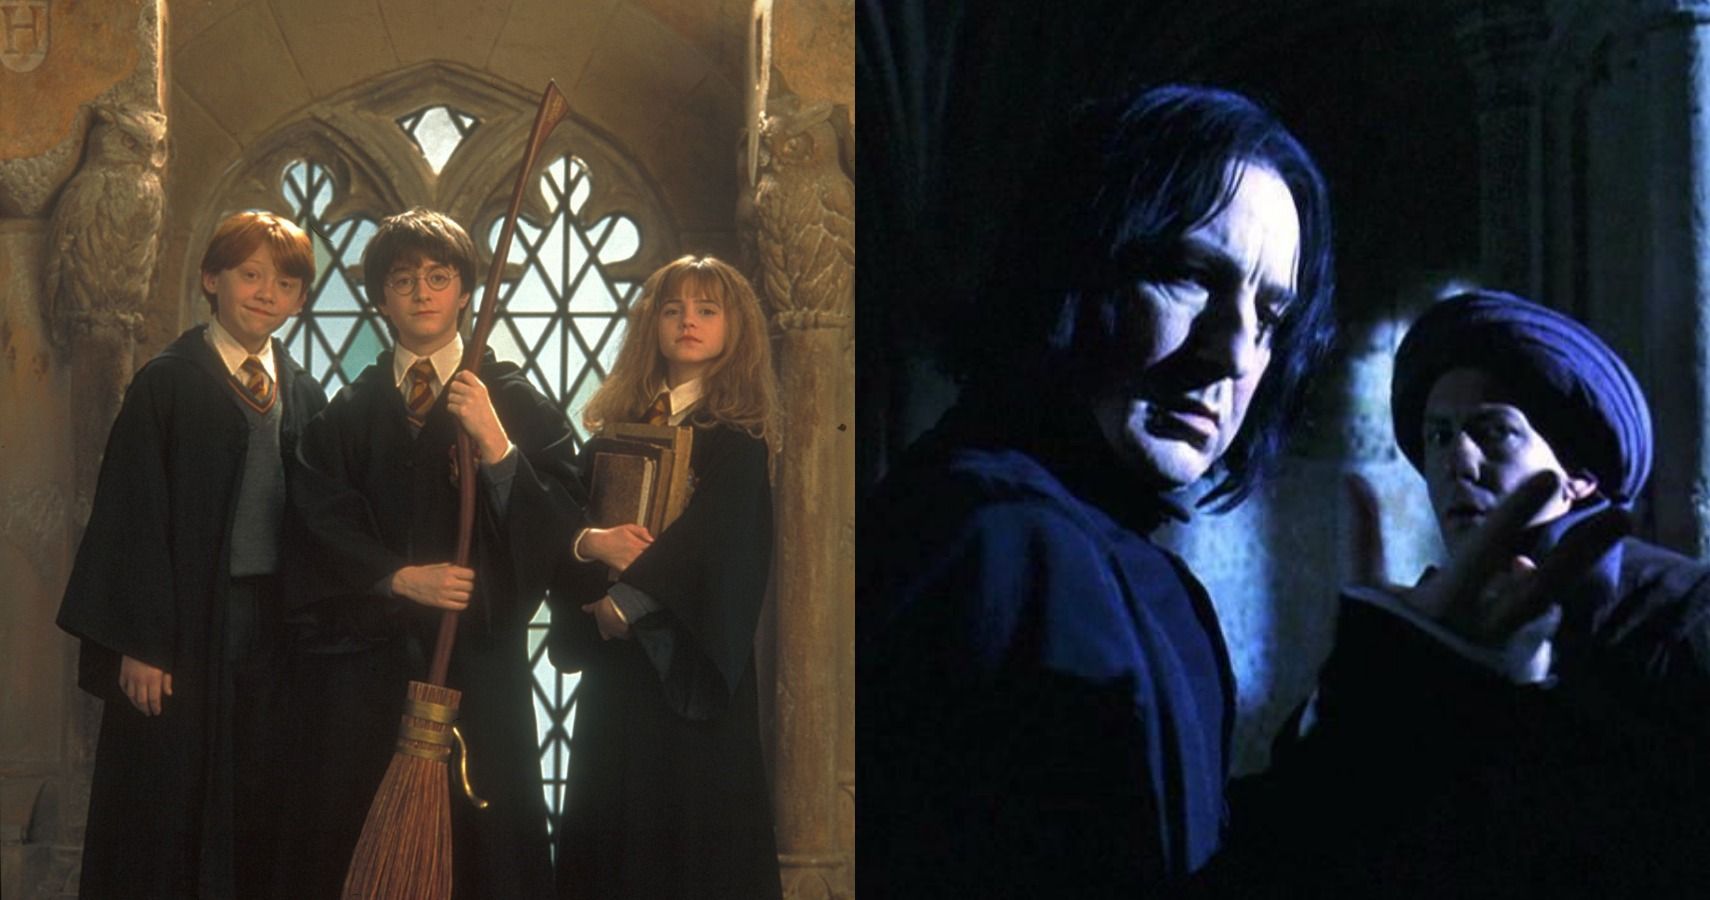 Harry Potter and the Sorcerer's Stone Featured Image with Harry Ron Hermione Snape and Quirrell